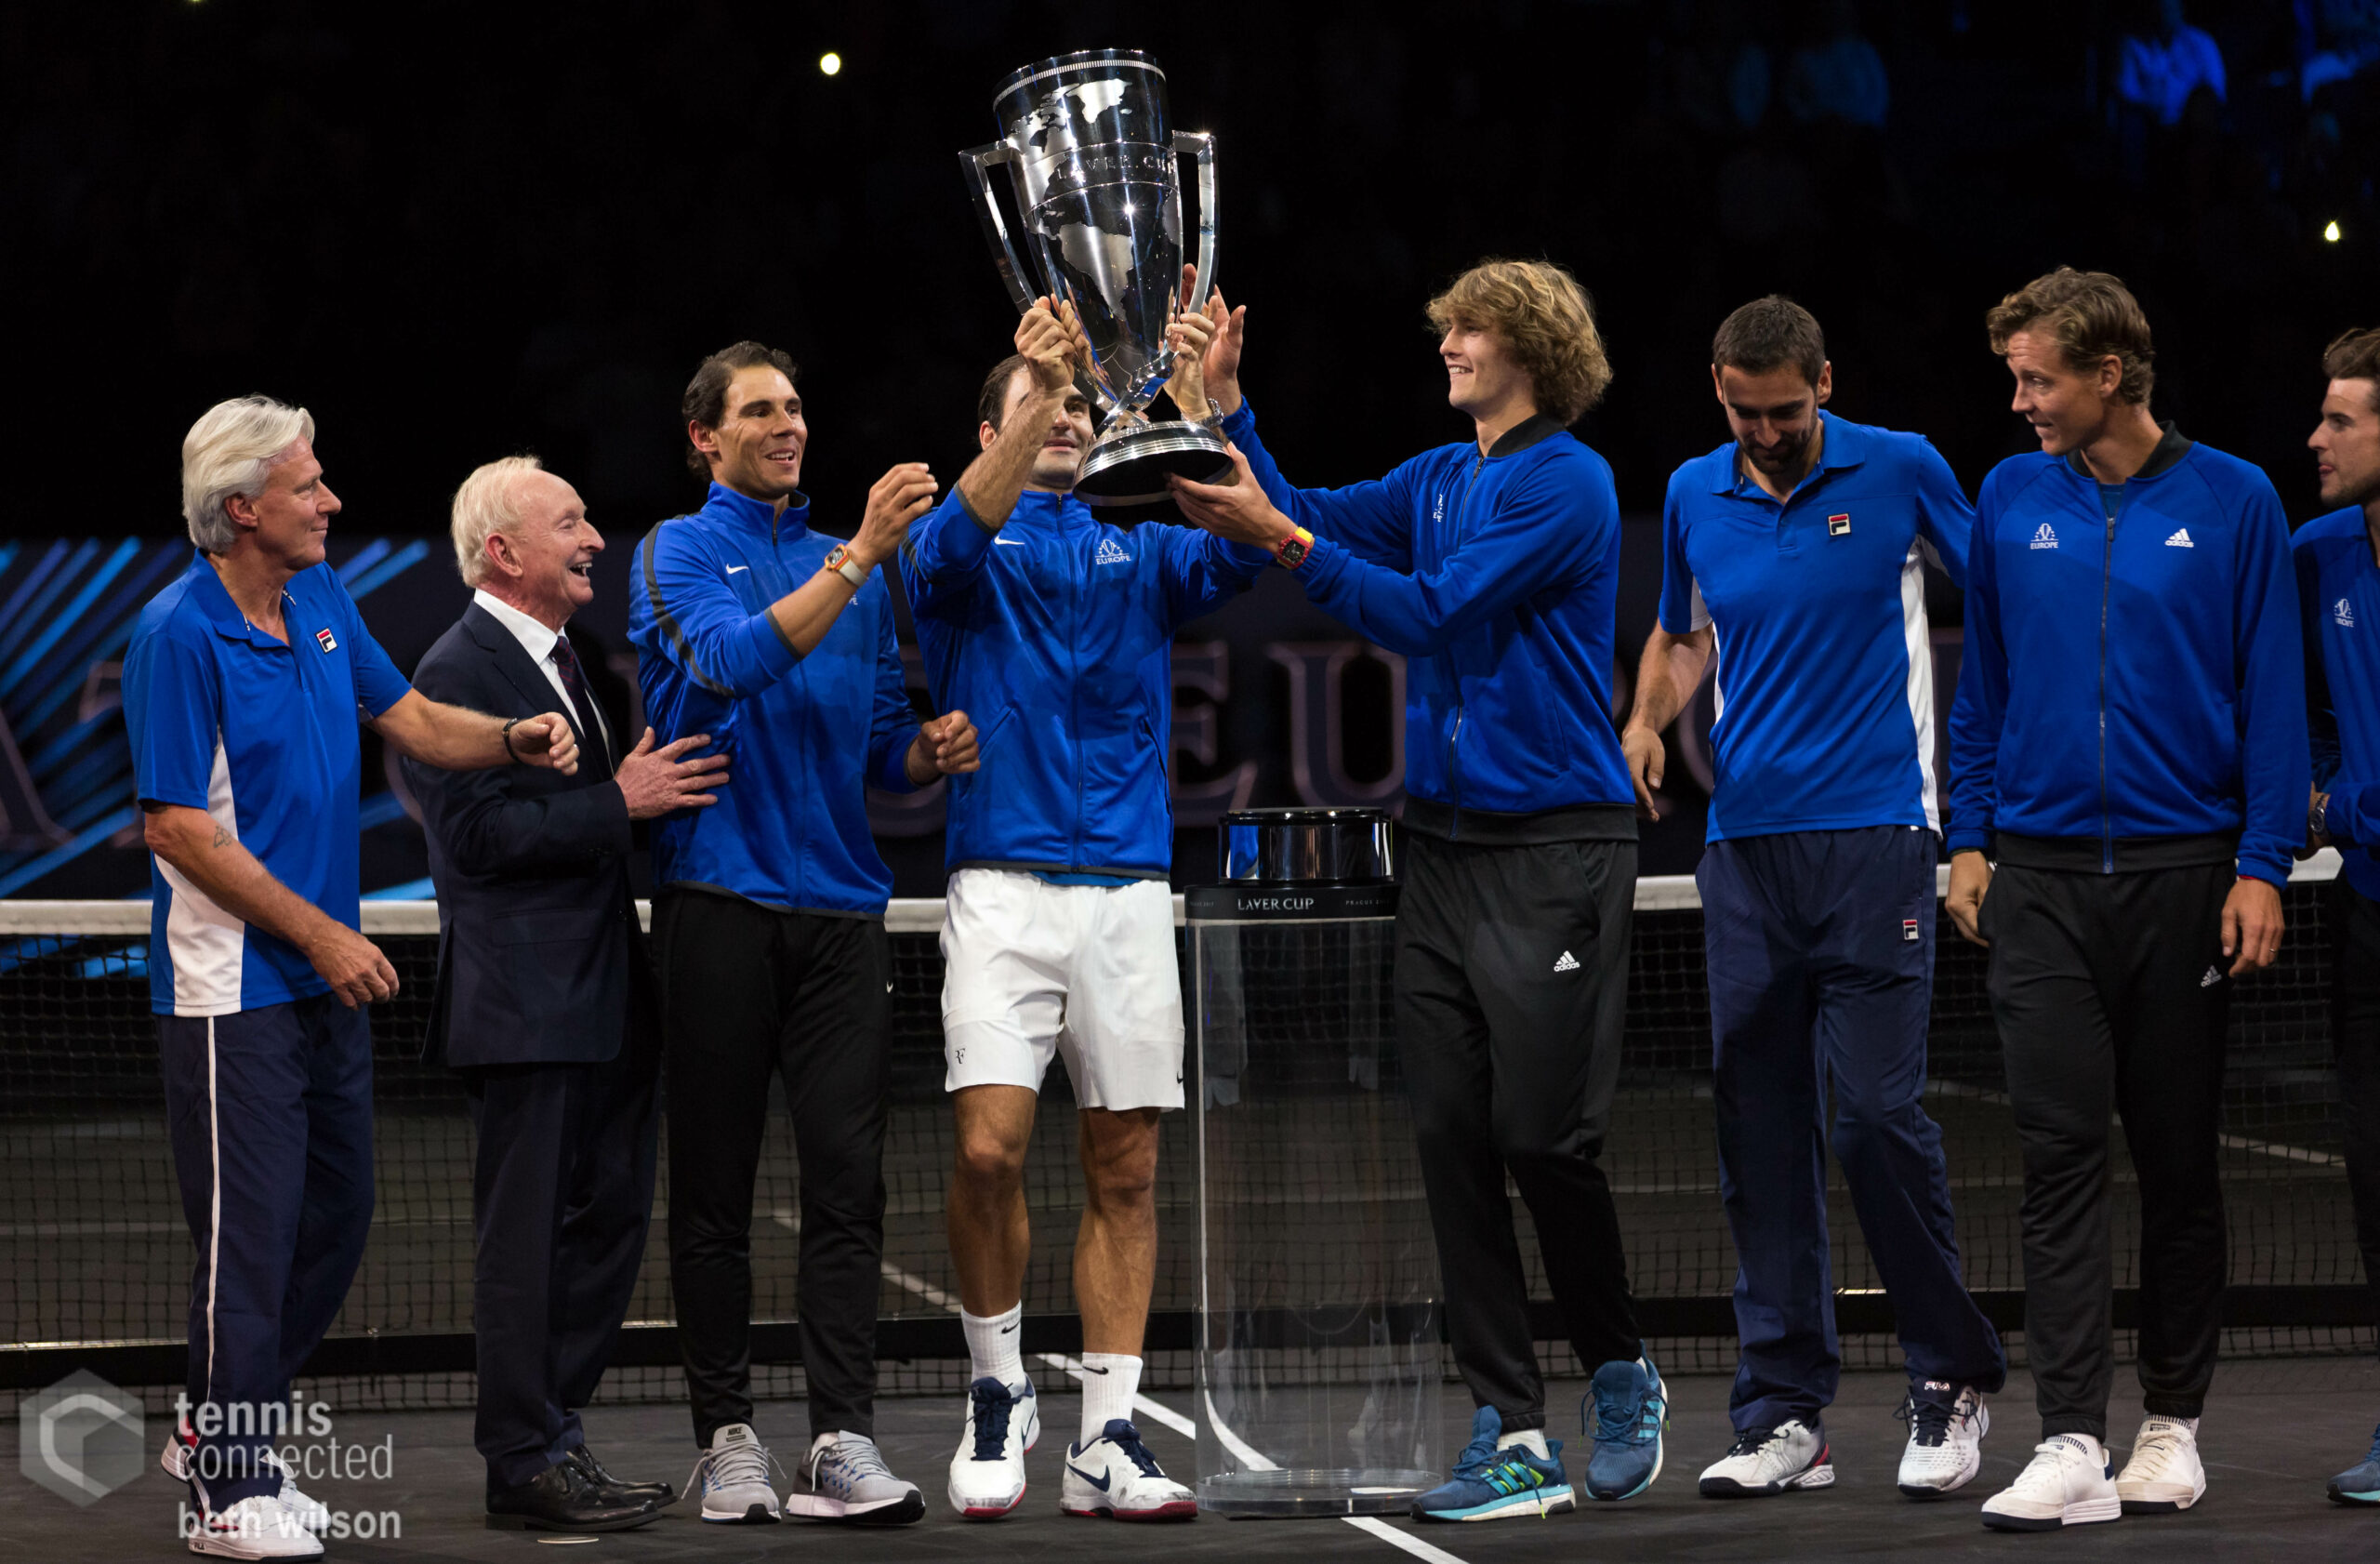 Laver Cup A flawed format?